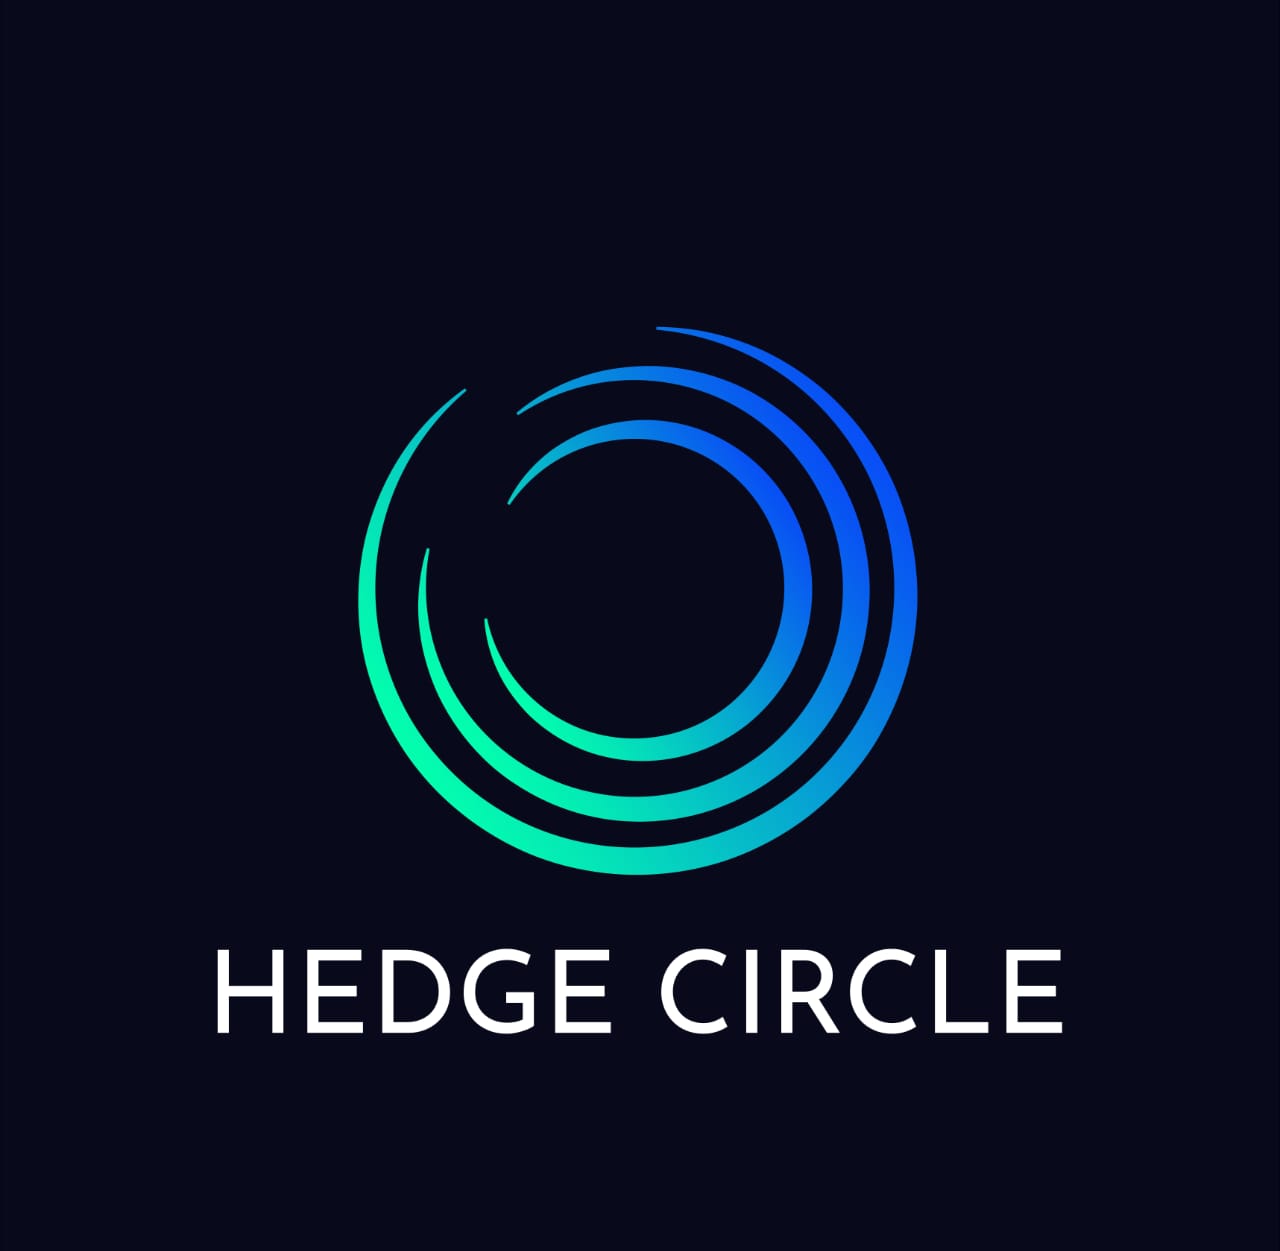 Hedge Circle, Wednesday, October 5, 2022, Press release picture